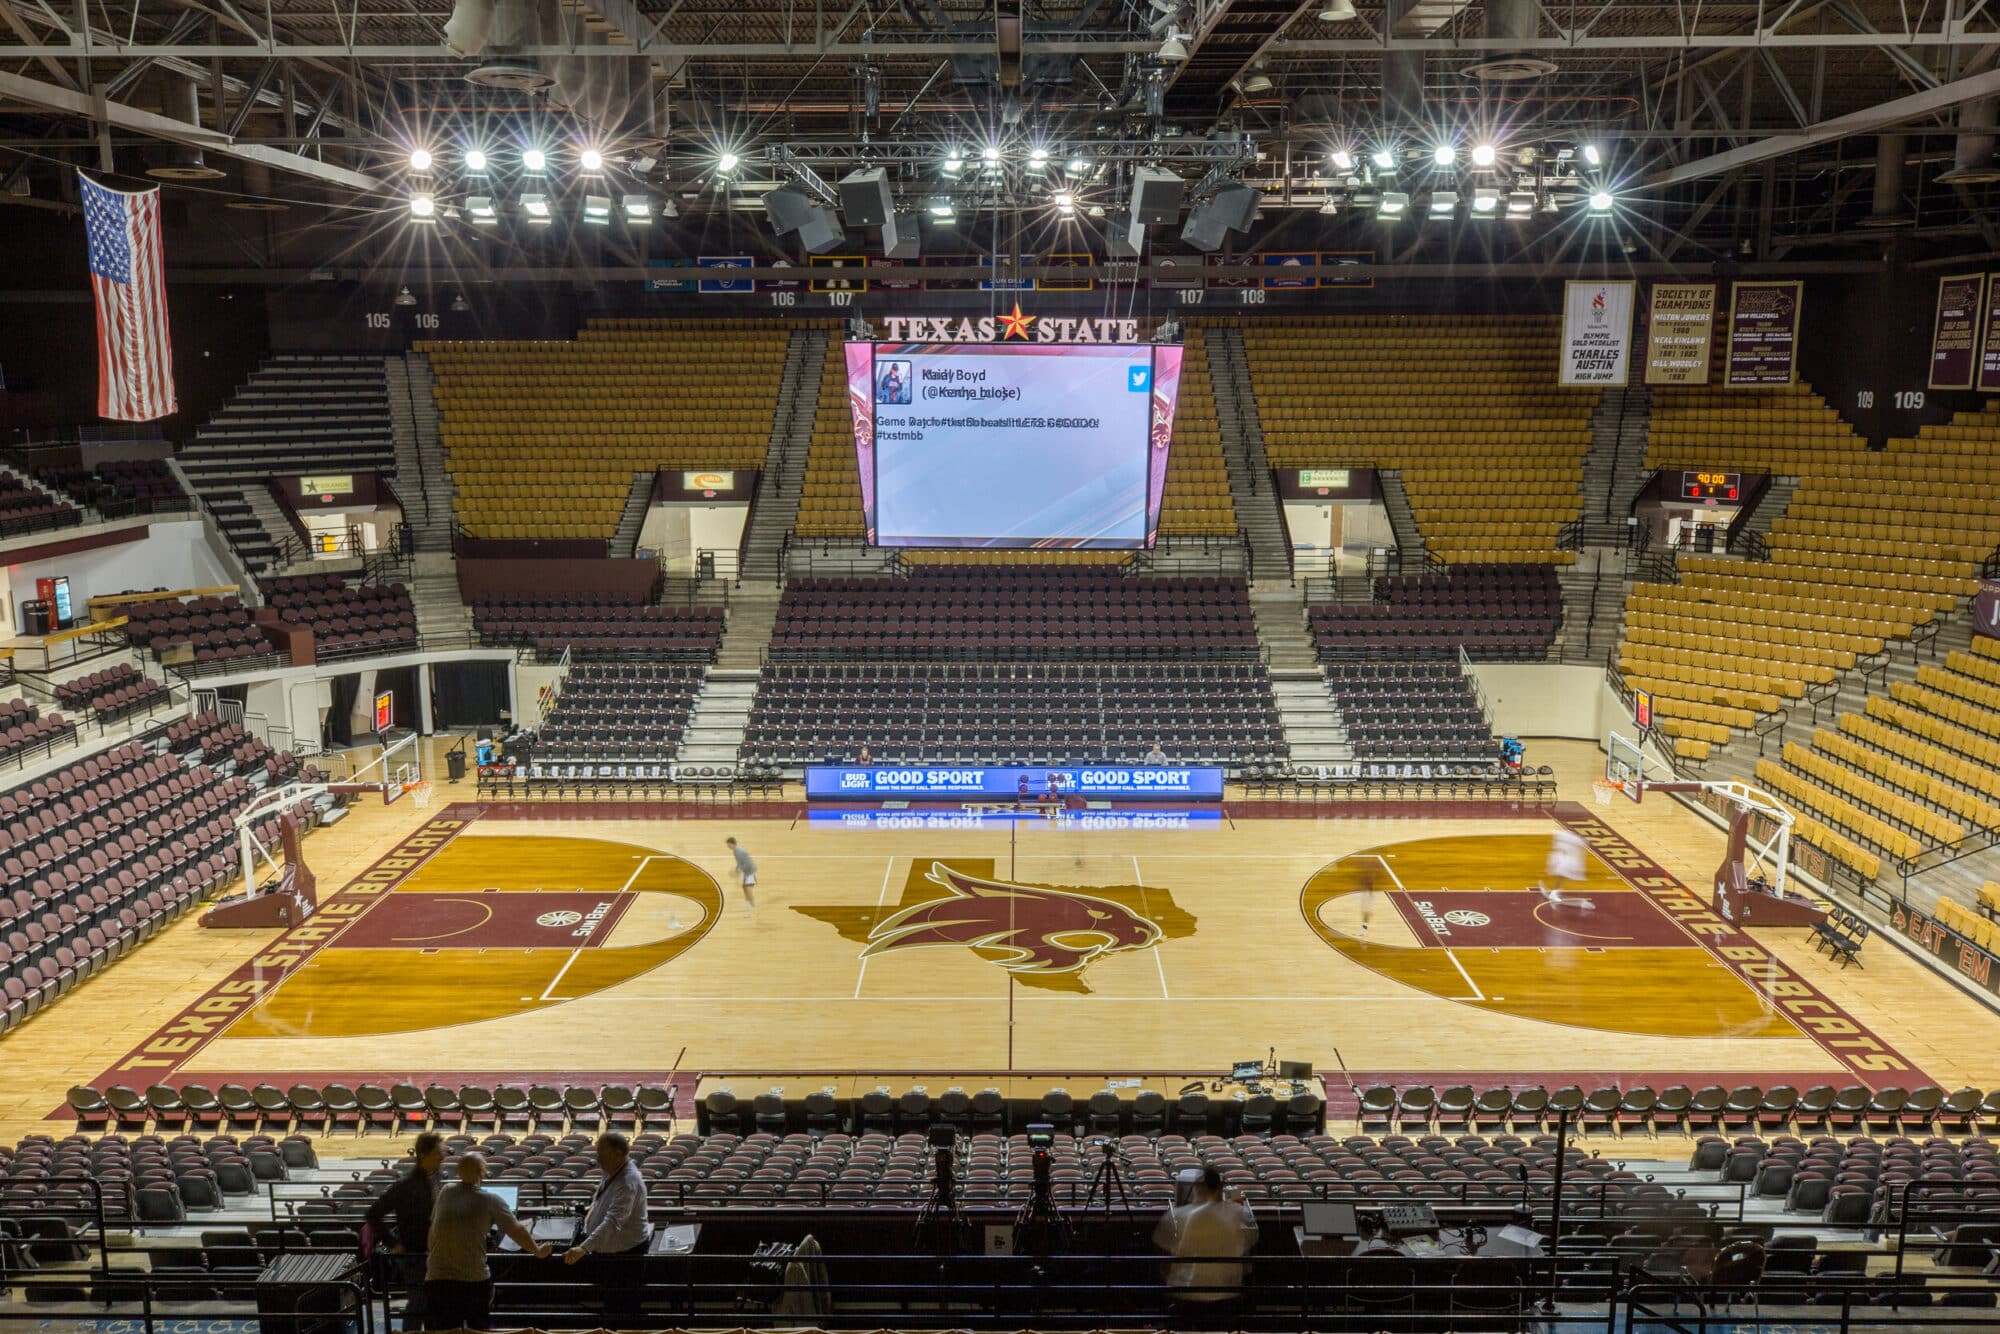 Texas State University basketball court in arena.